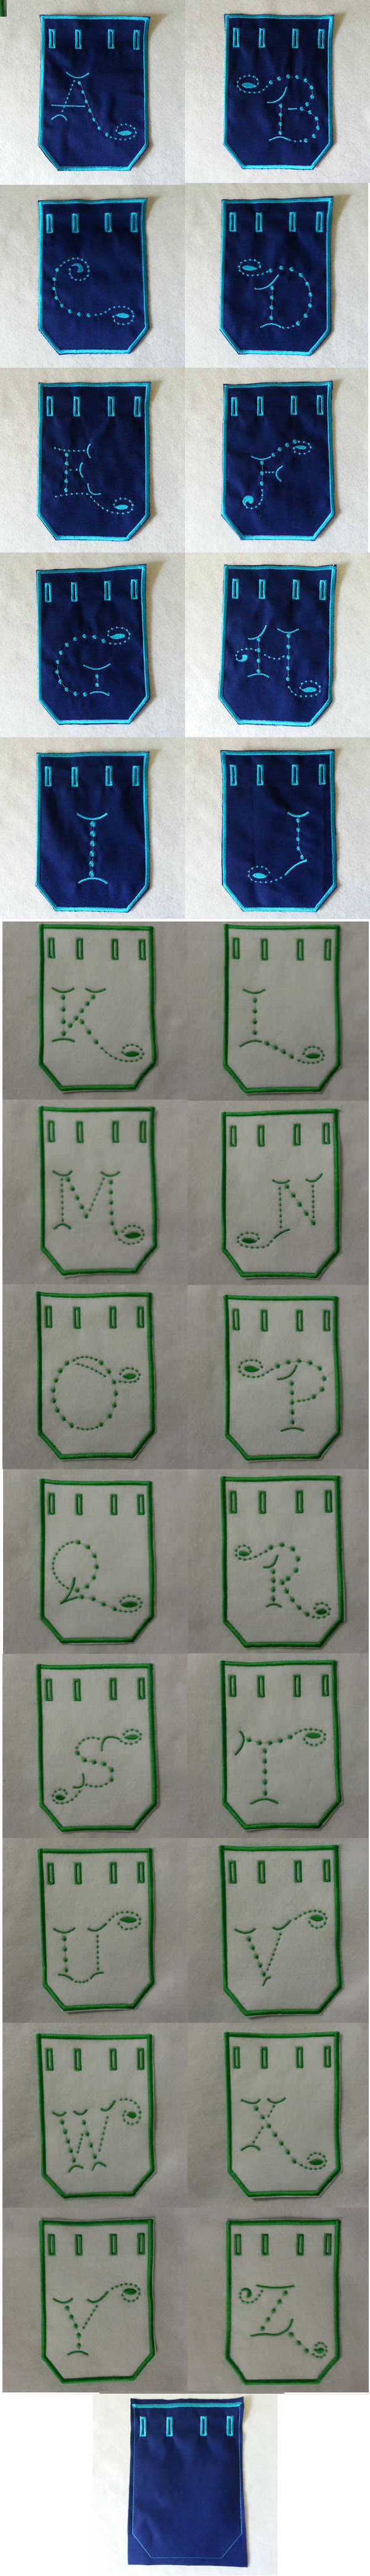 Candlewick Alpha Bags for Him Embroidery Machine Design Details